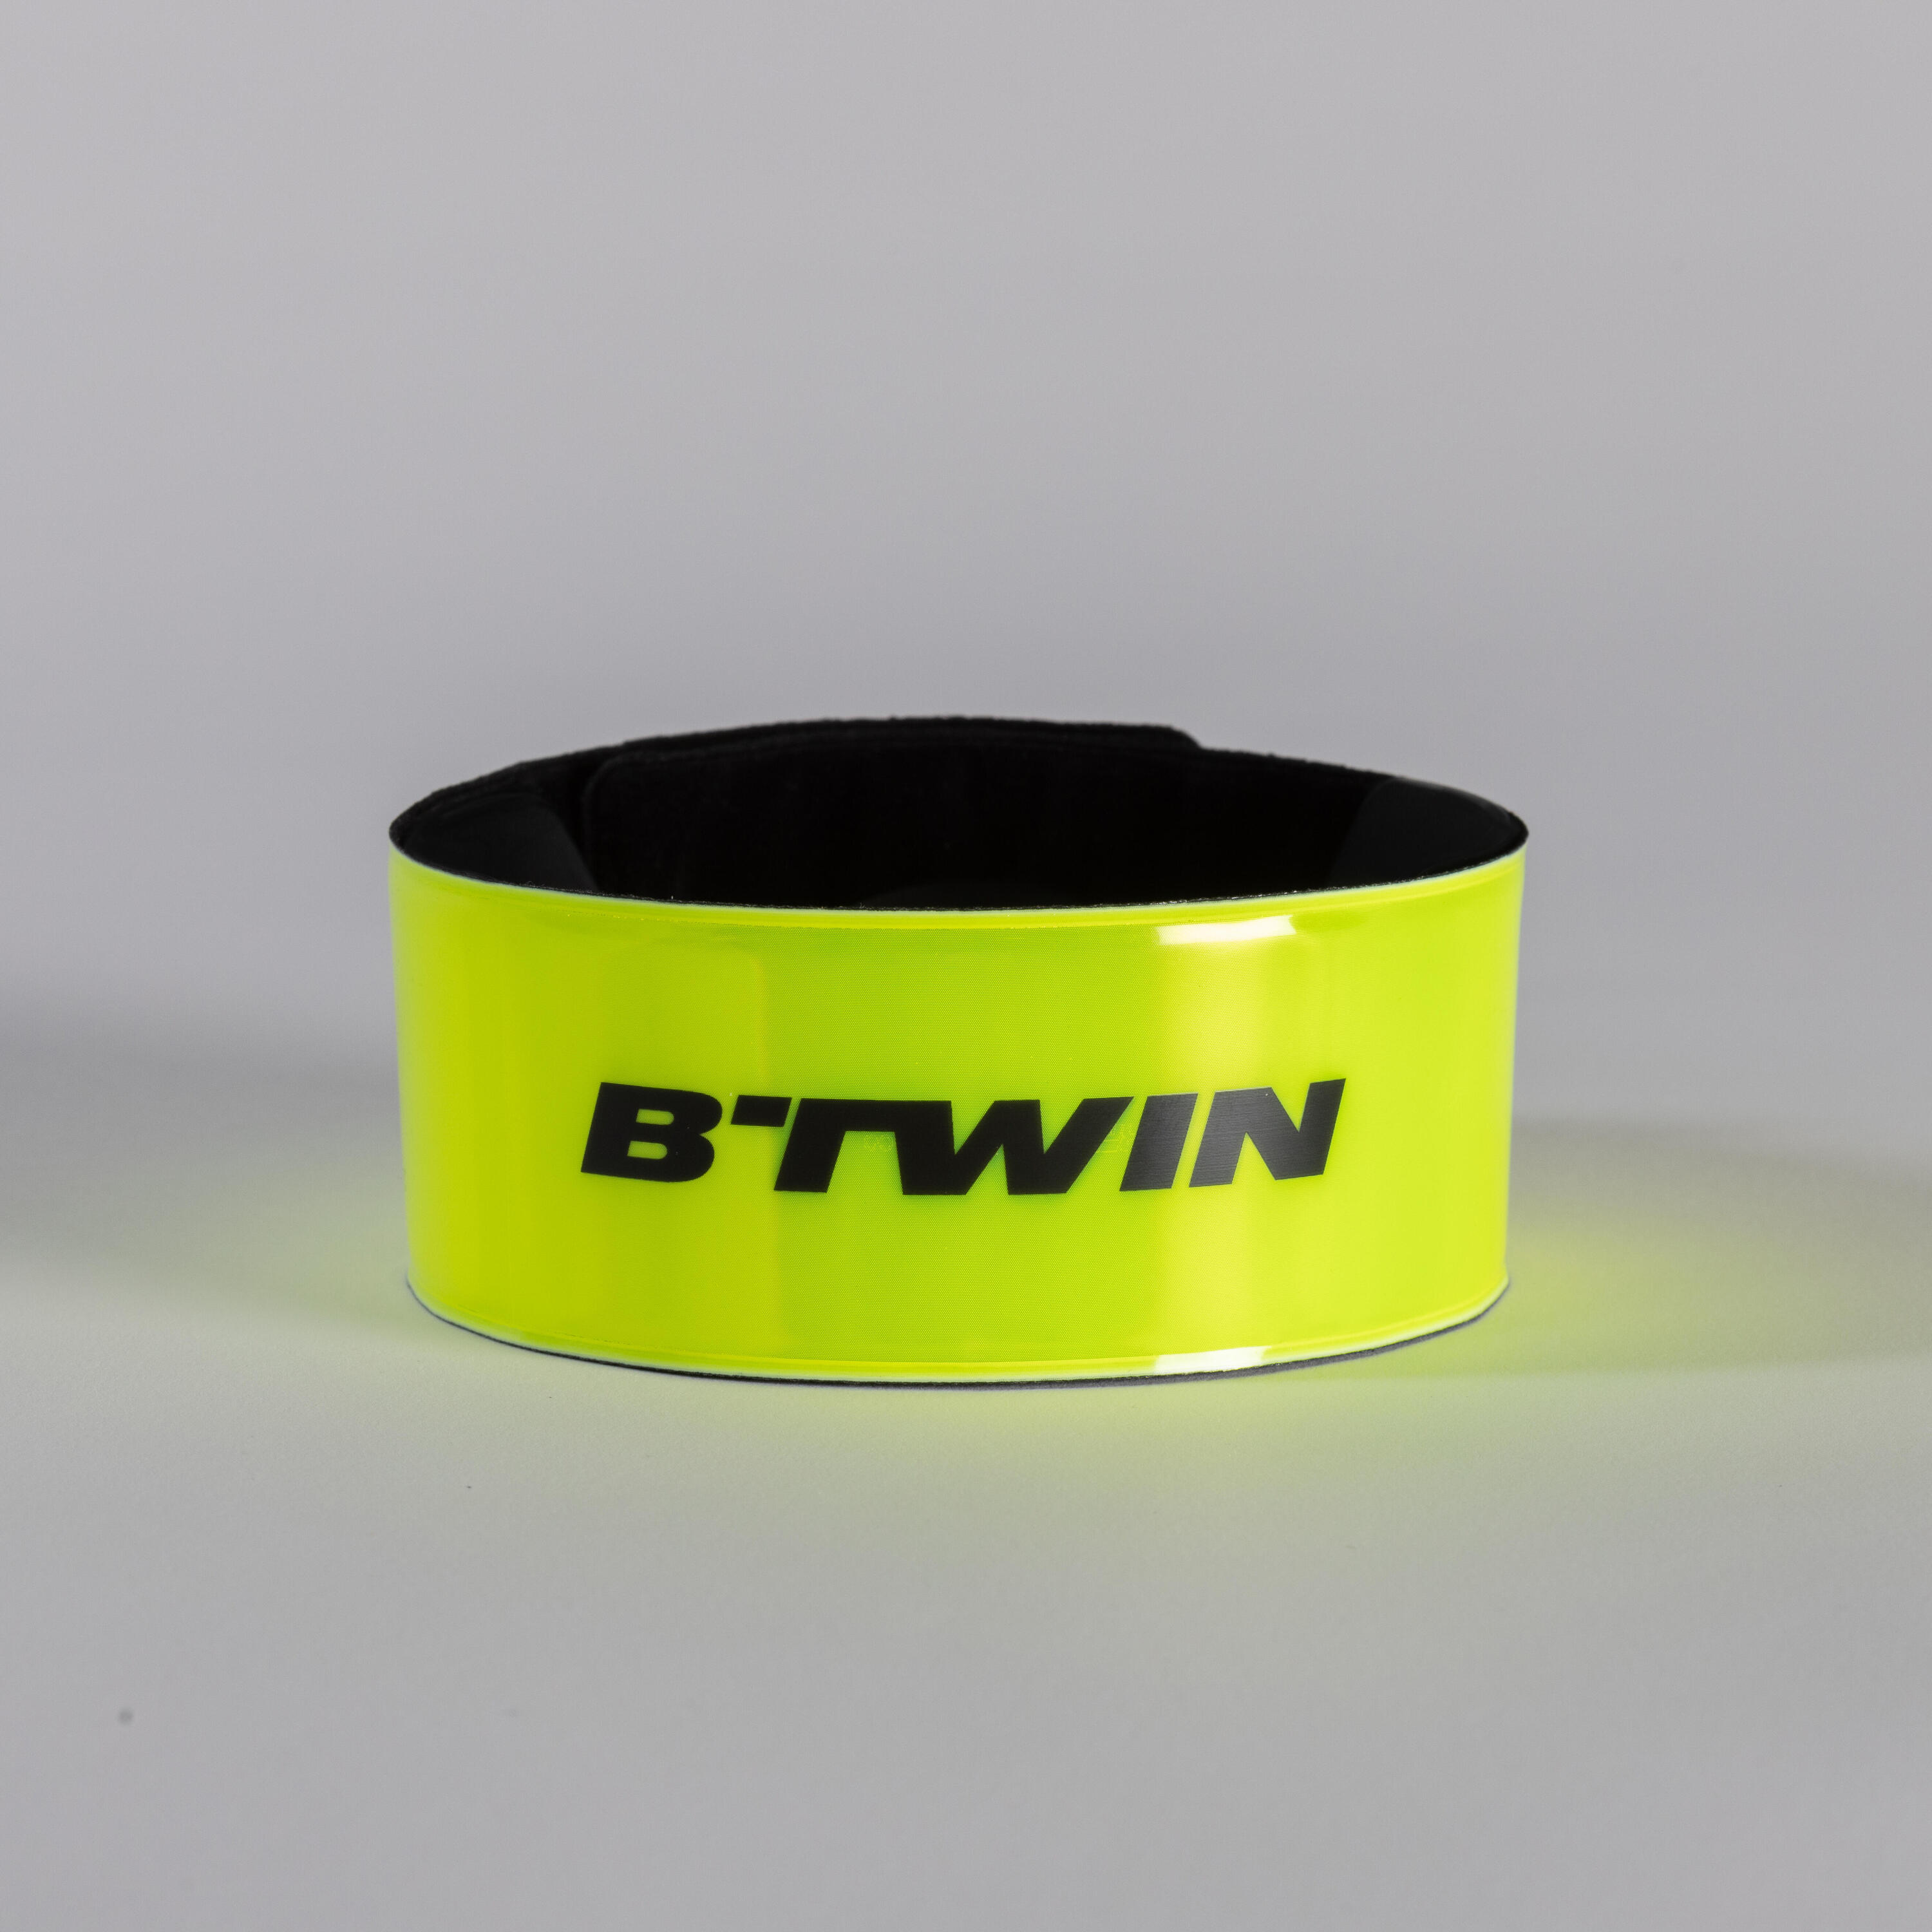 BTWIN Cycling Visibility Armband - Neon Yellow